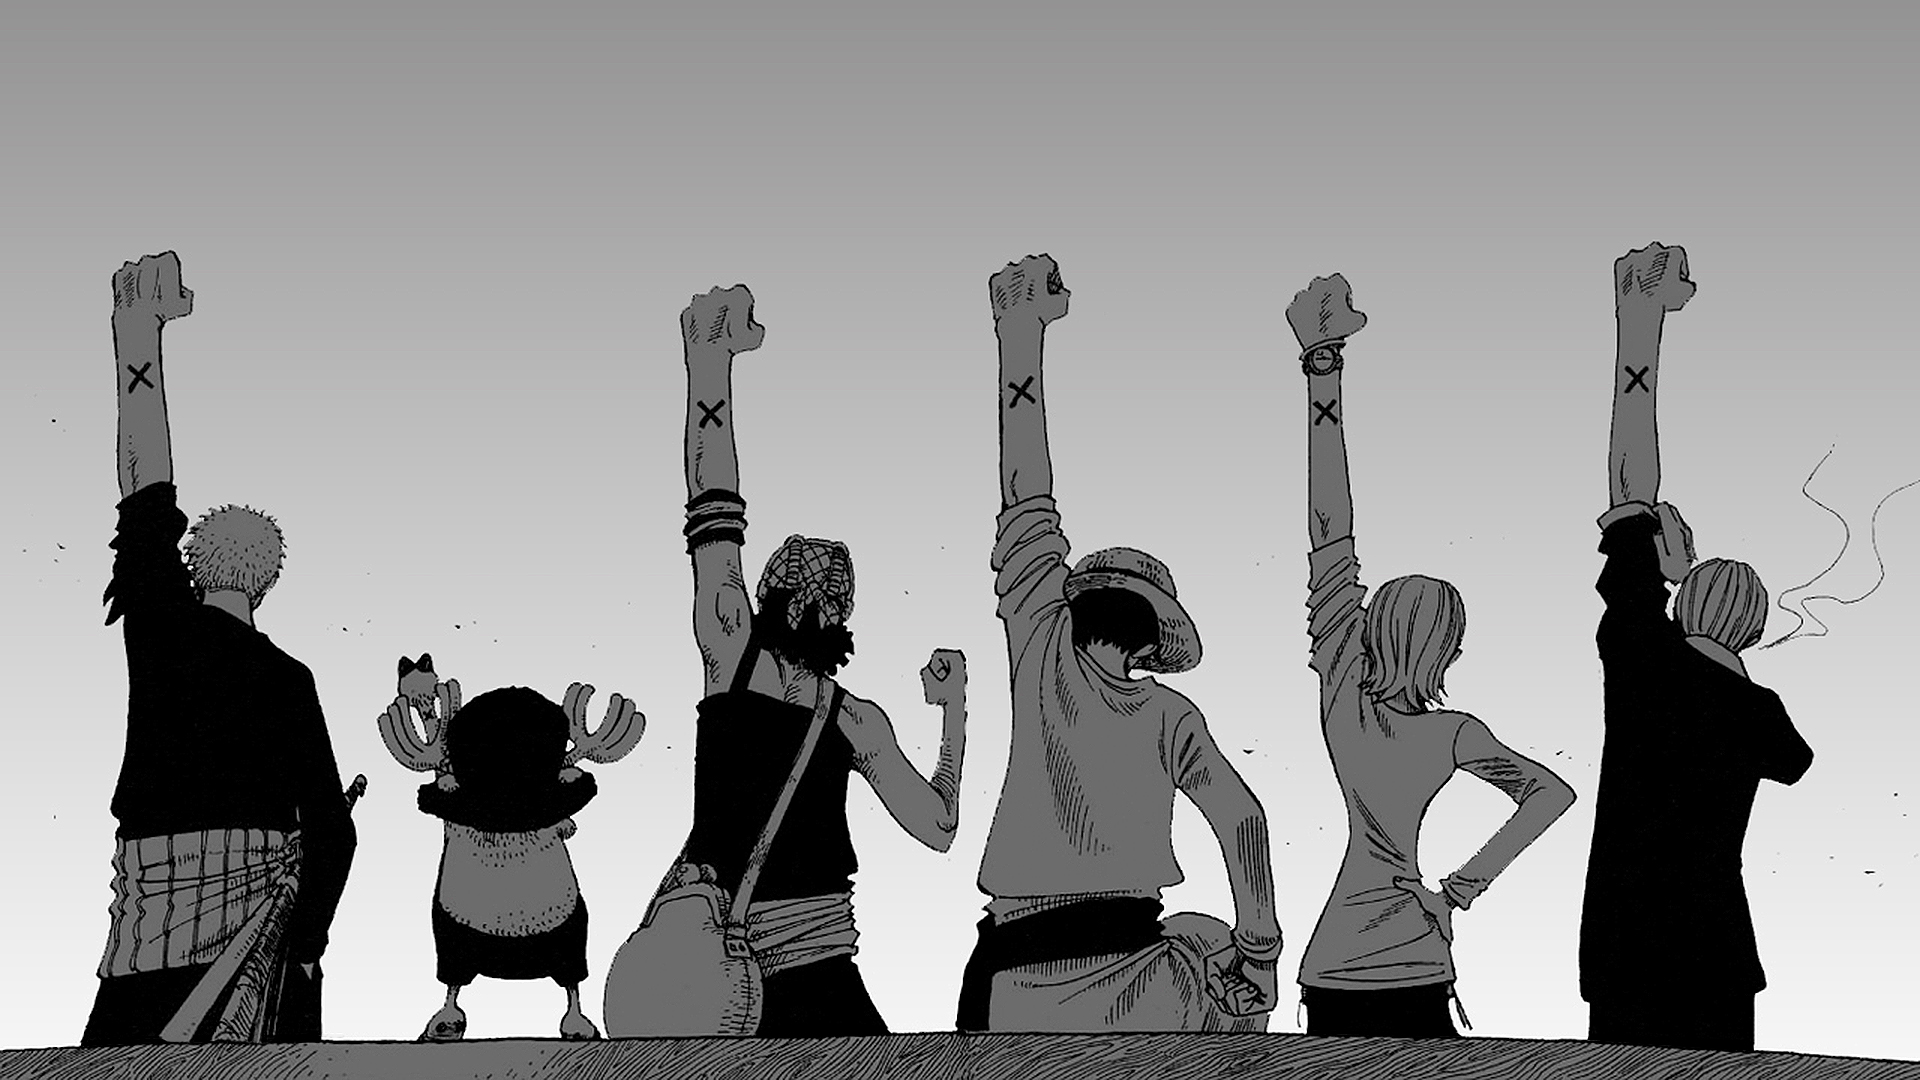 One of the best scenes in One Piece imo Also - #118335216 added by